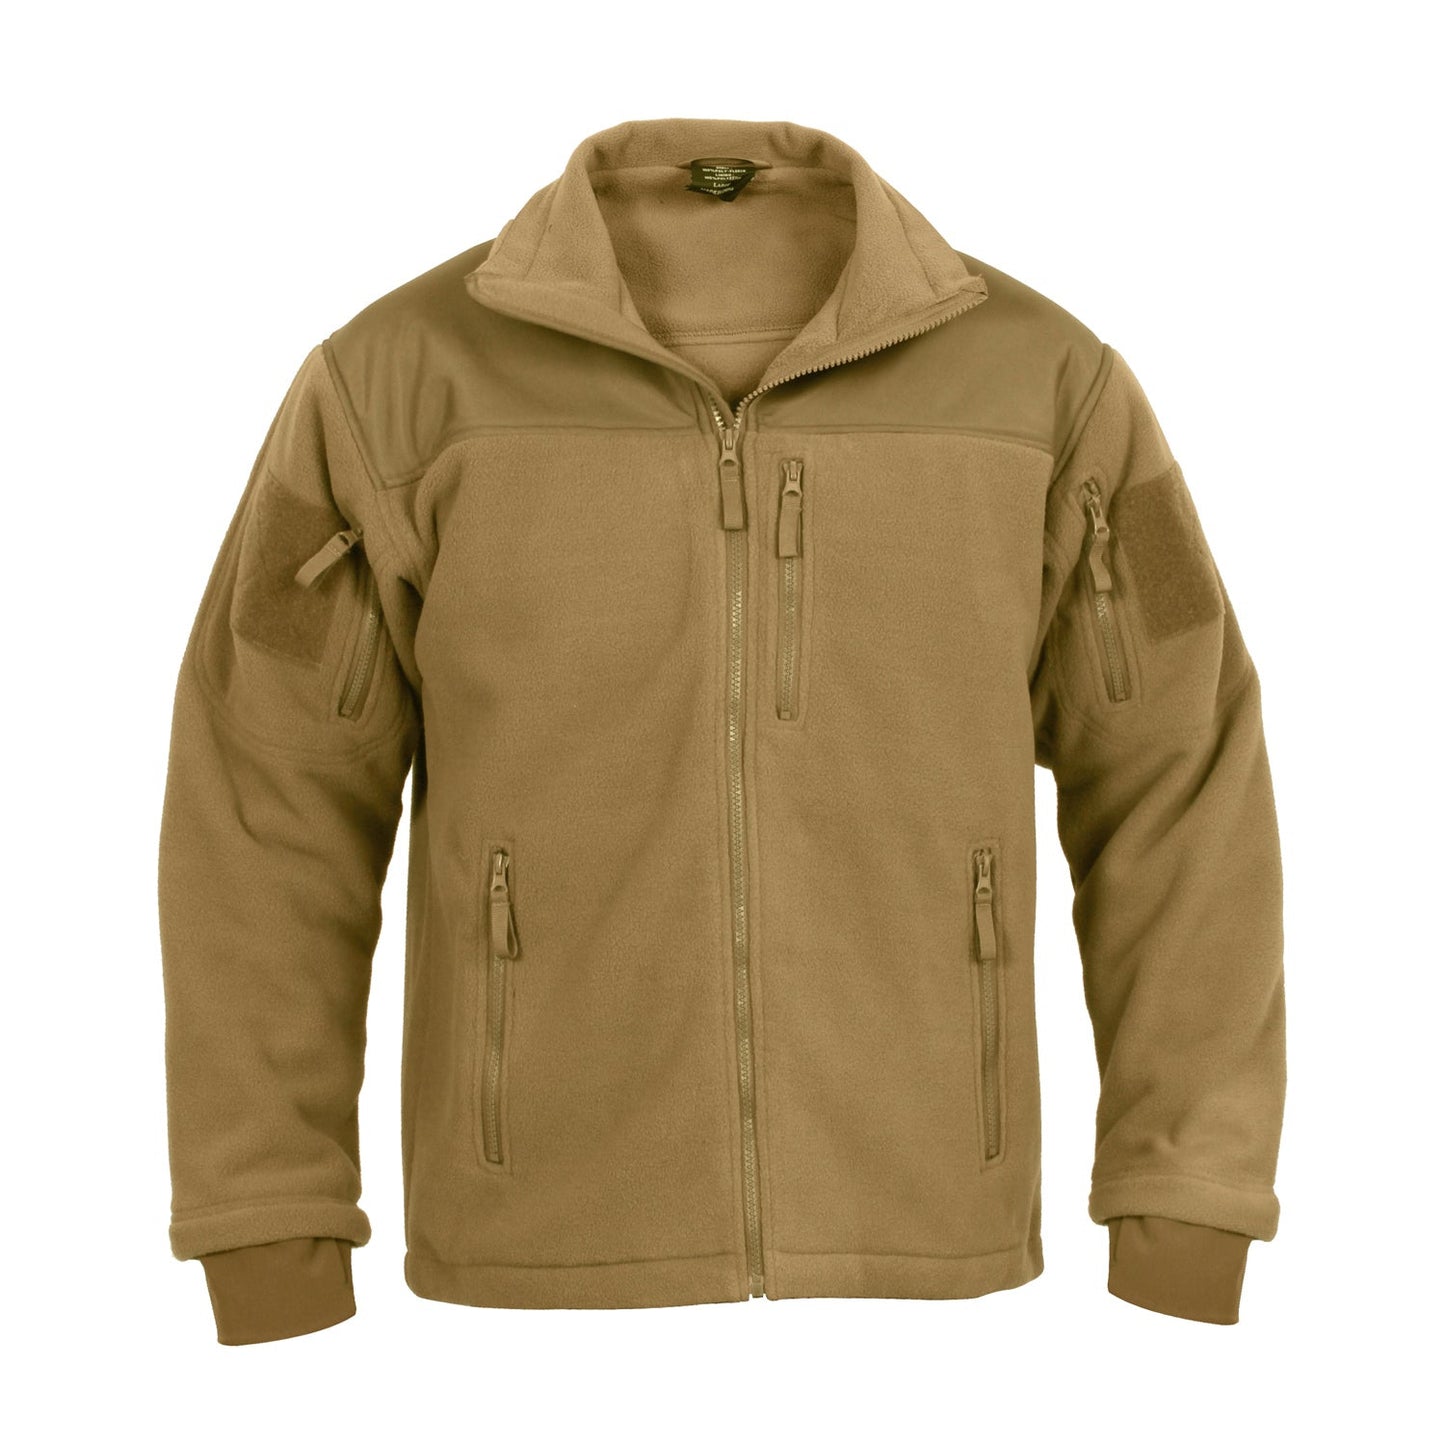 Rothco’s Spec Ops Tactical Fleece Jacket is made of 100% heavyweight polyester fleece and has an interior tricot lining for added warmth.